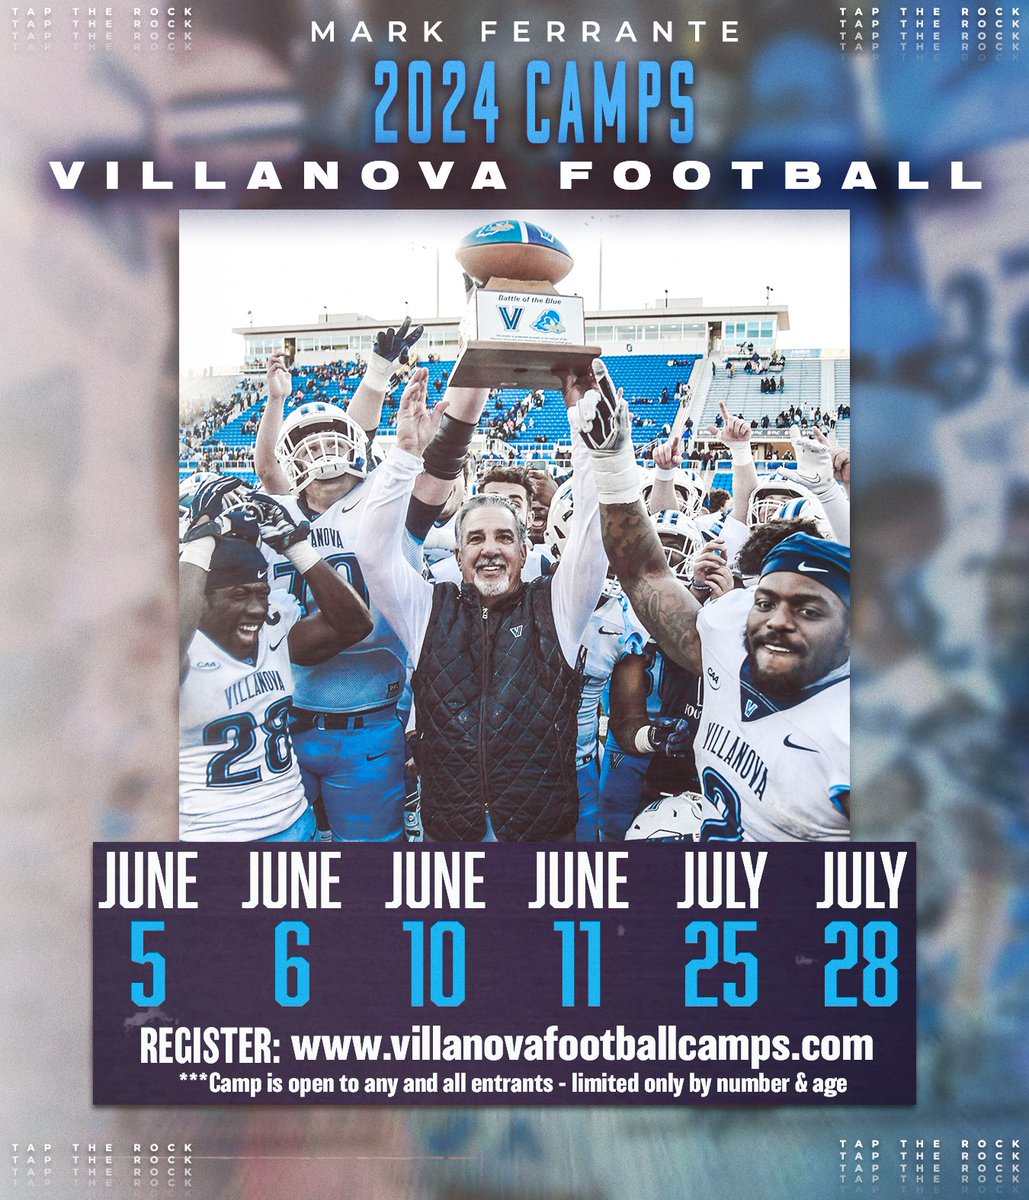 ‼️ 2024 PROSPECT CAMP DATES ‼️

GREAT OPPORTUNITY TO COMPETE THIS SUMMER!!!

SIGN UP: villanovafootballcamps.com 

#TapTheRock #FlyTheV